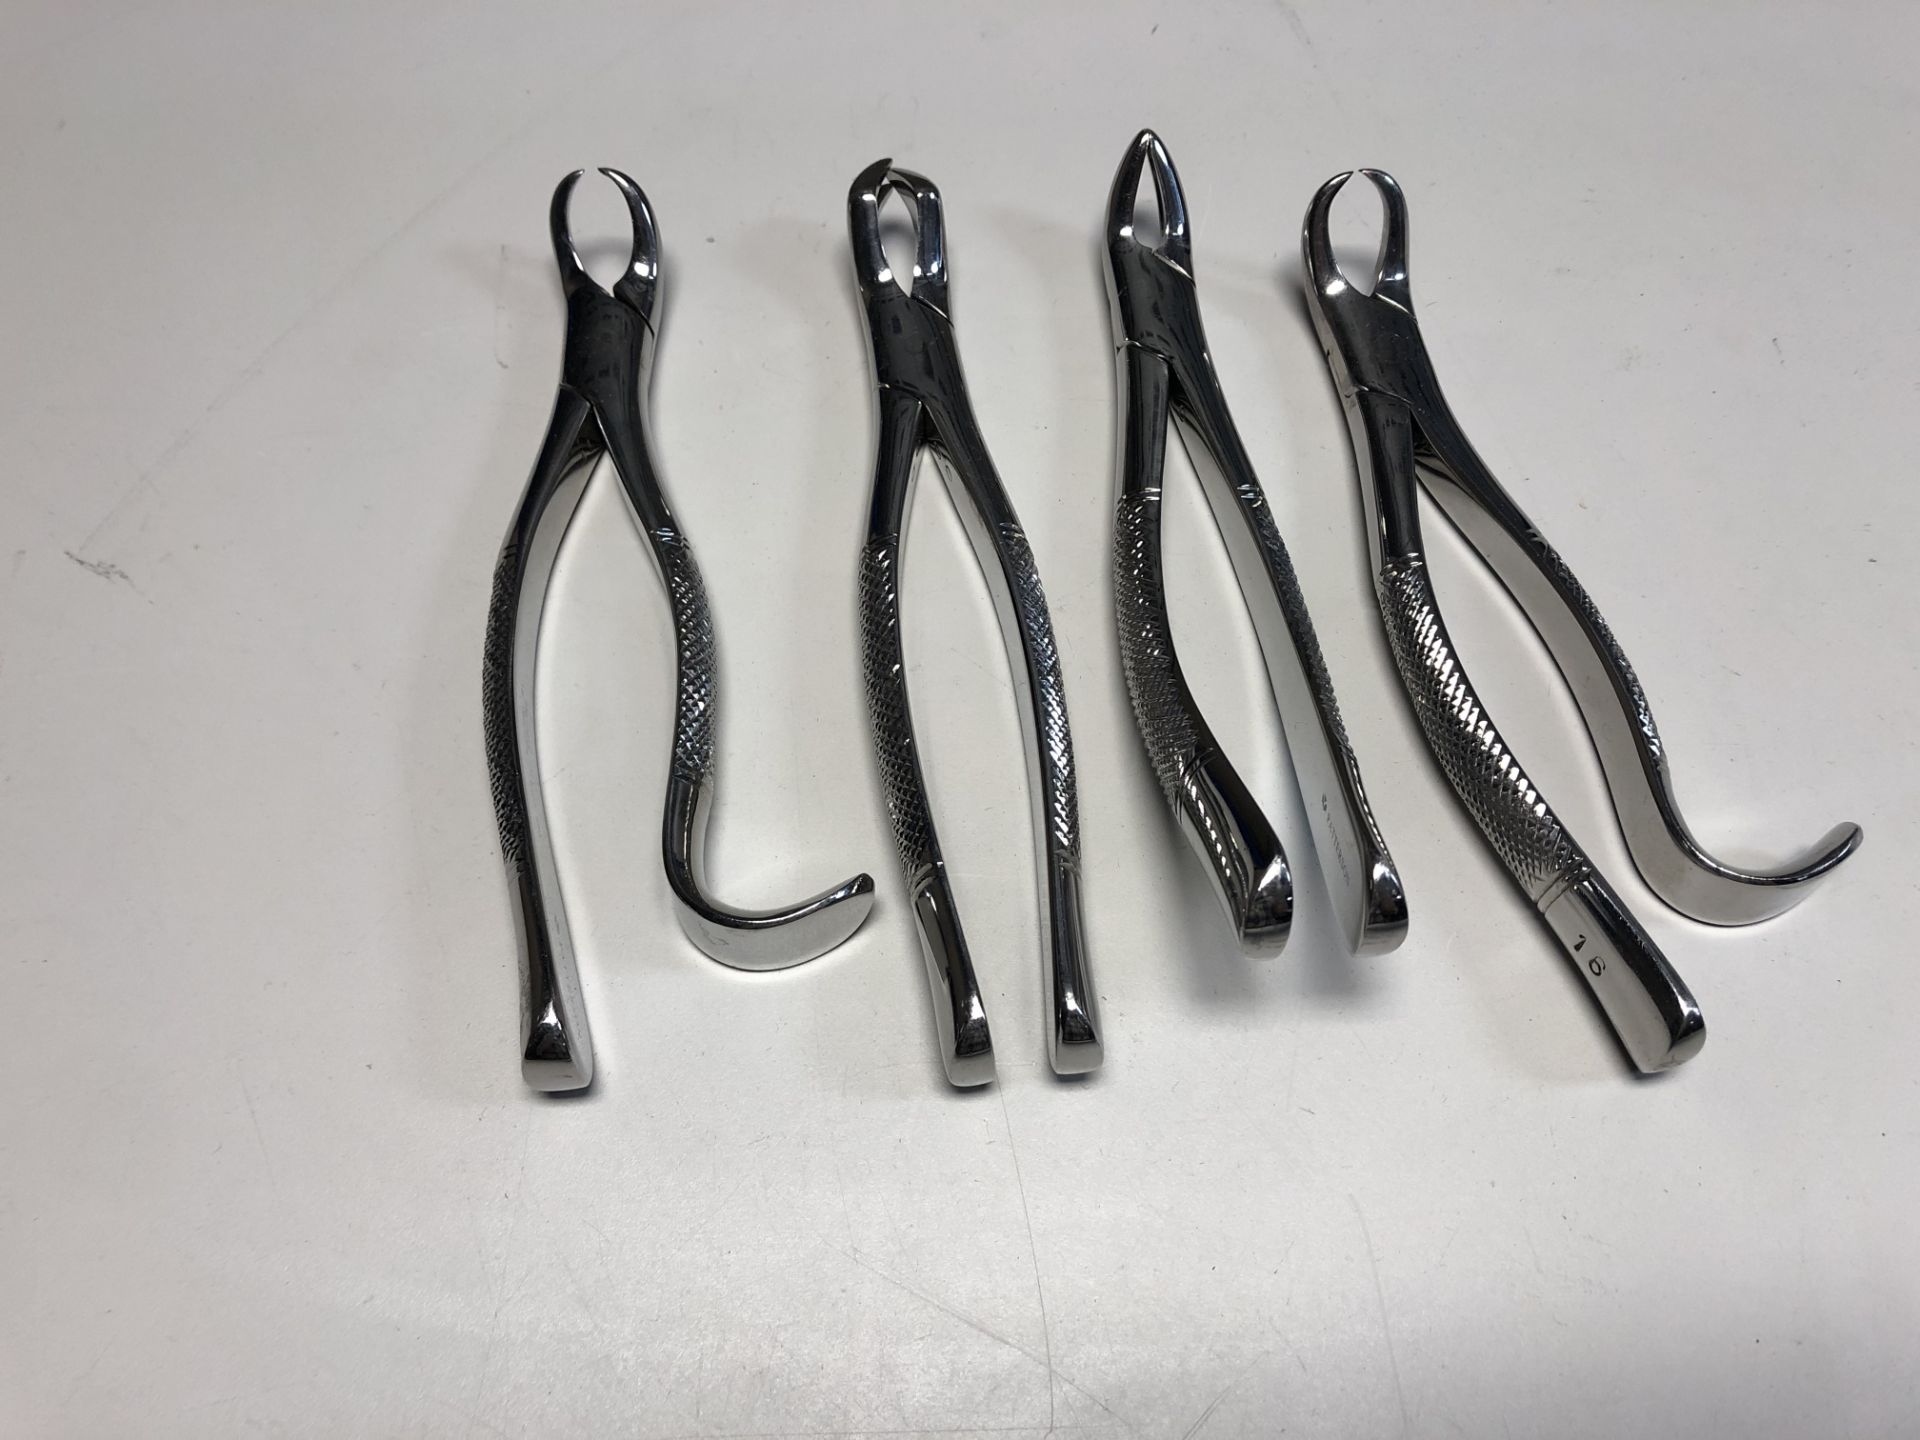 LOT OF PATTERSON DENTAL EXTRACTION FORCEPS/PLIERS TOOLS